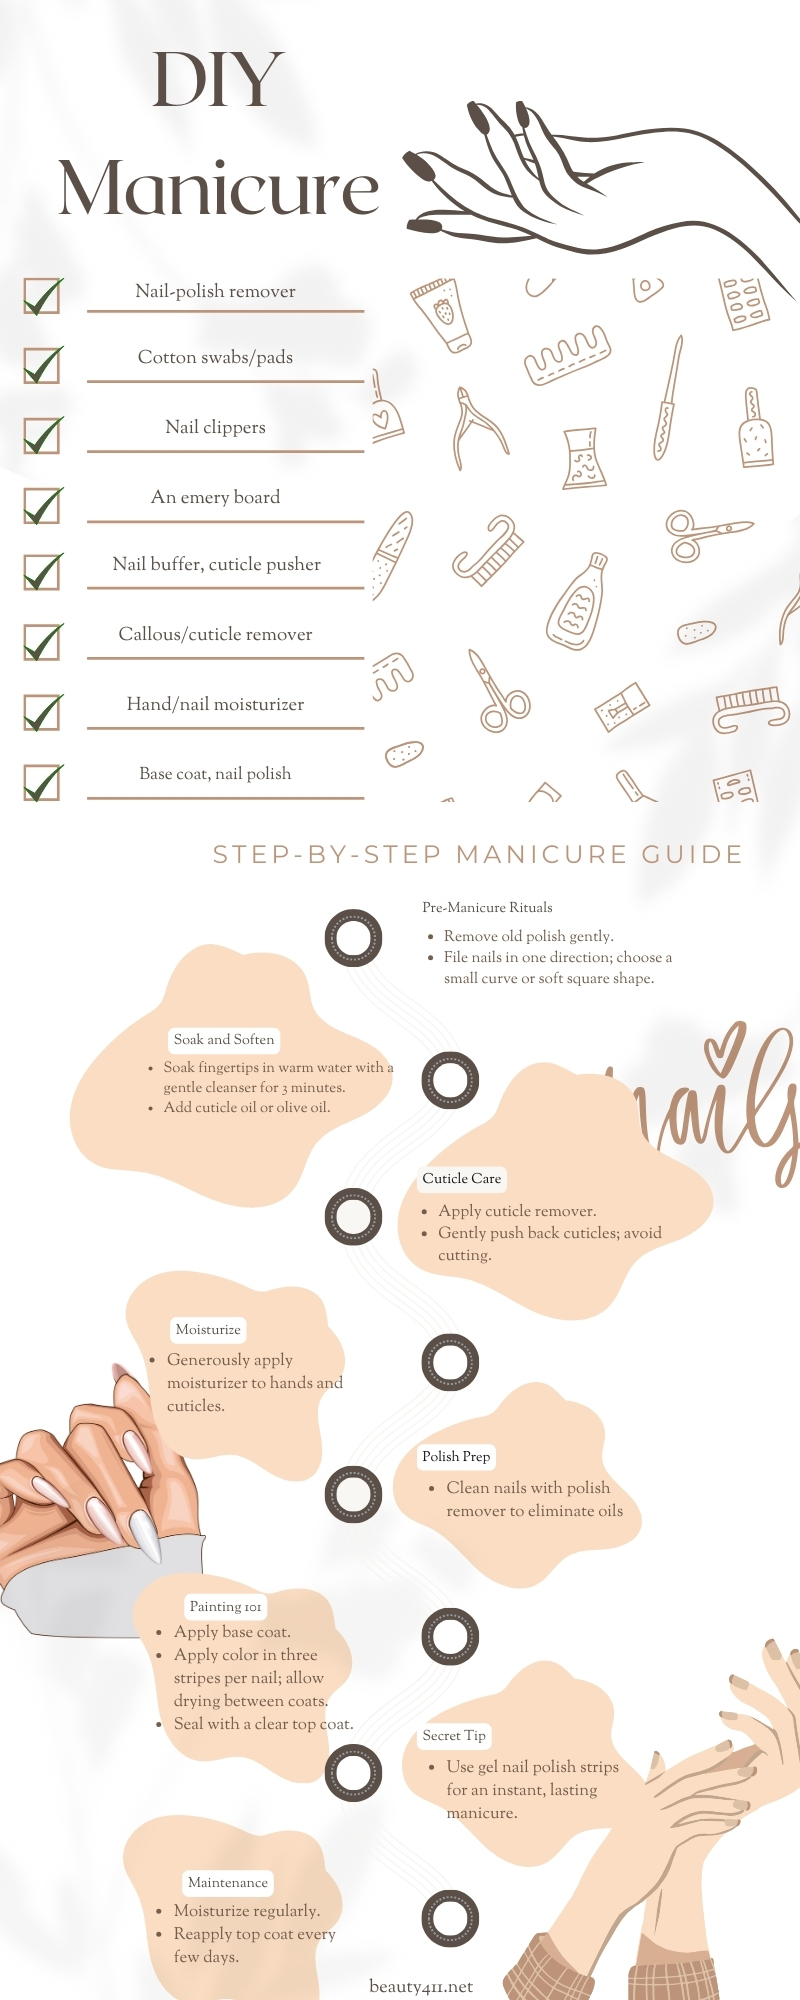 Infographic about DIY Manicure